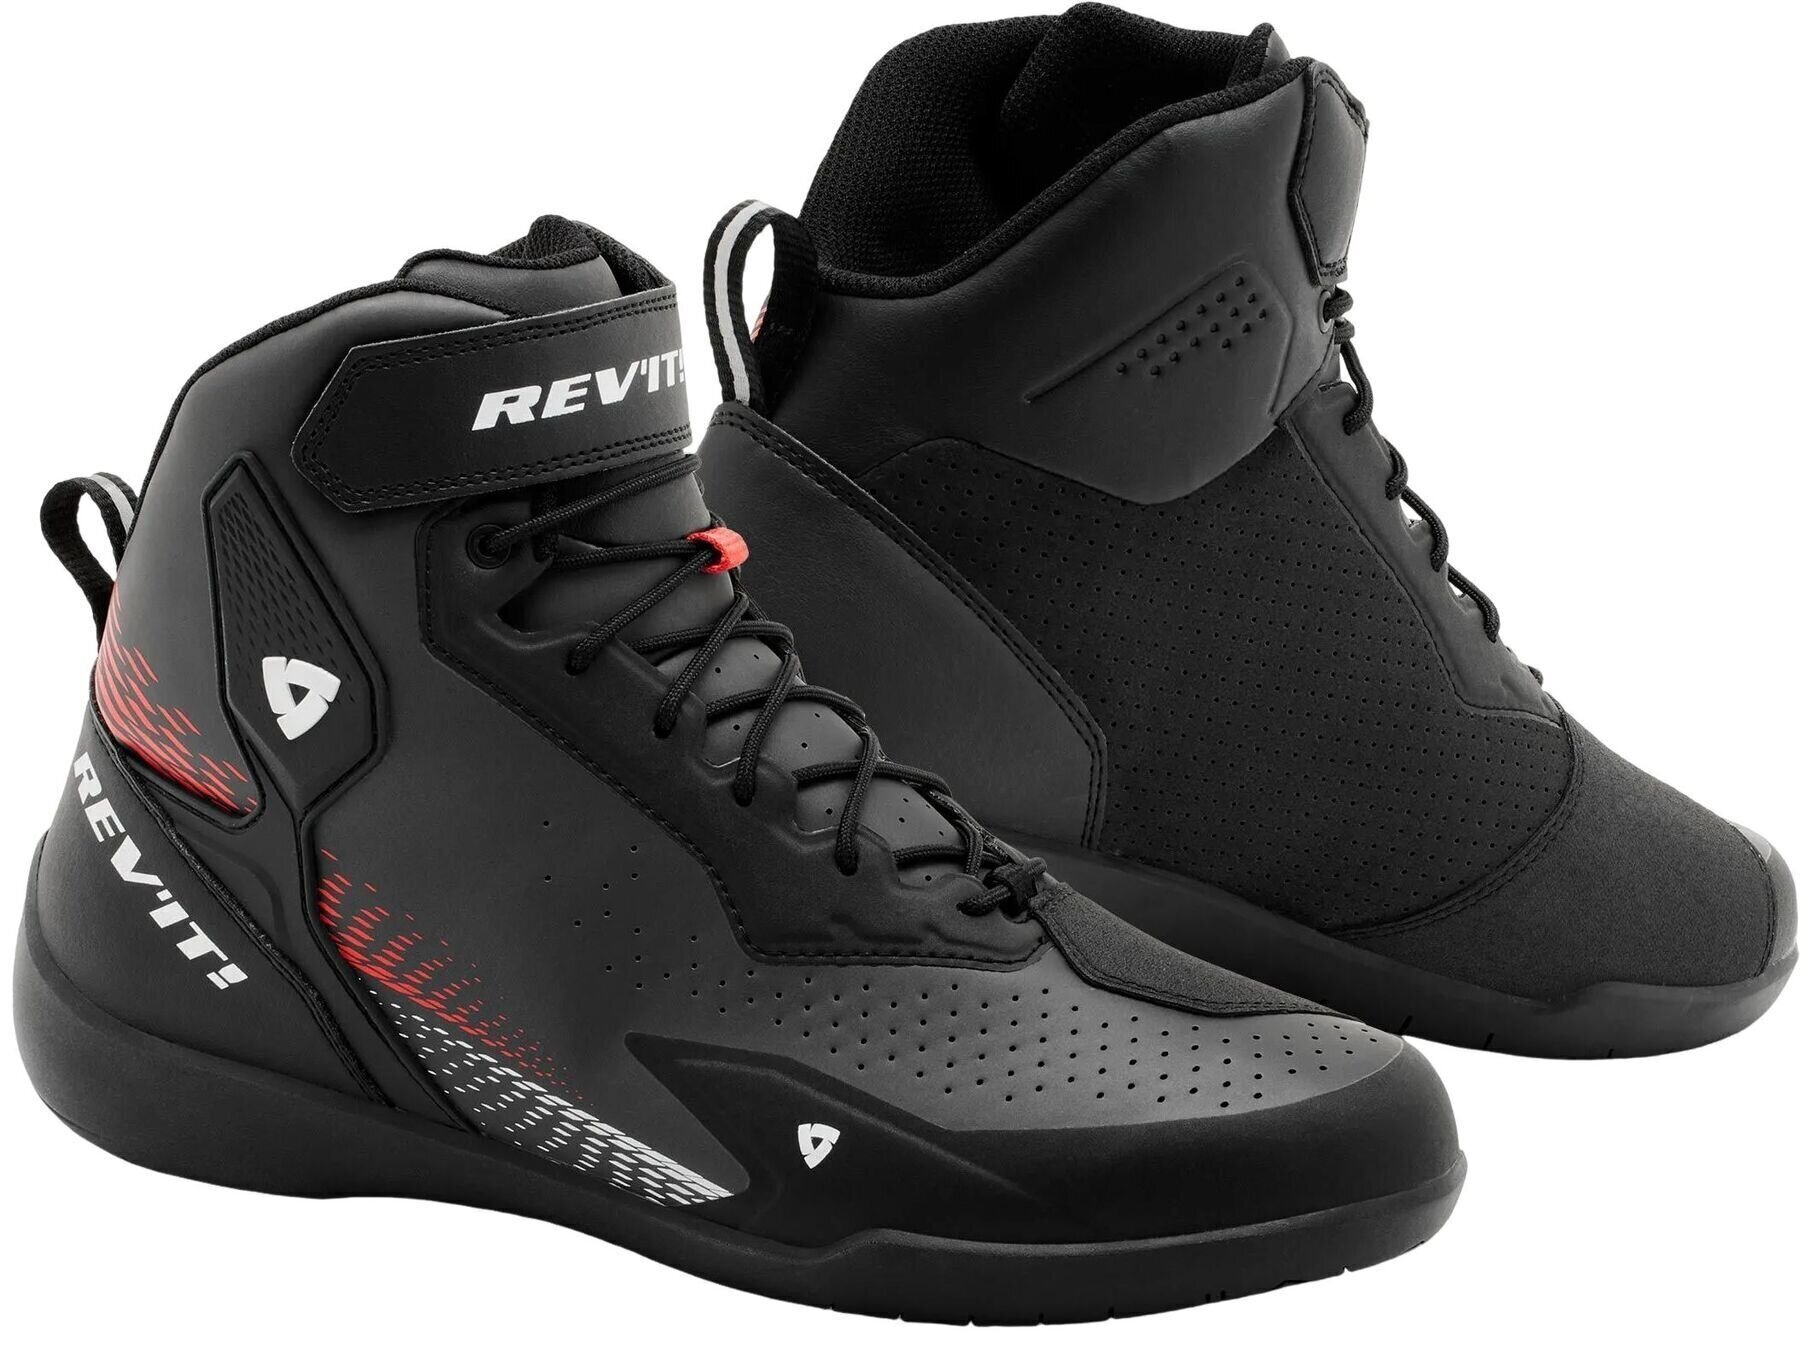 Boty Rev'it! Shoes G-Force 2 Black/Neon Red 39 Boty